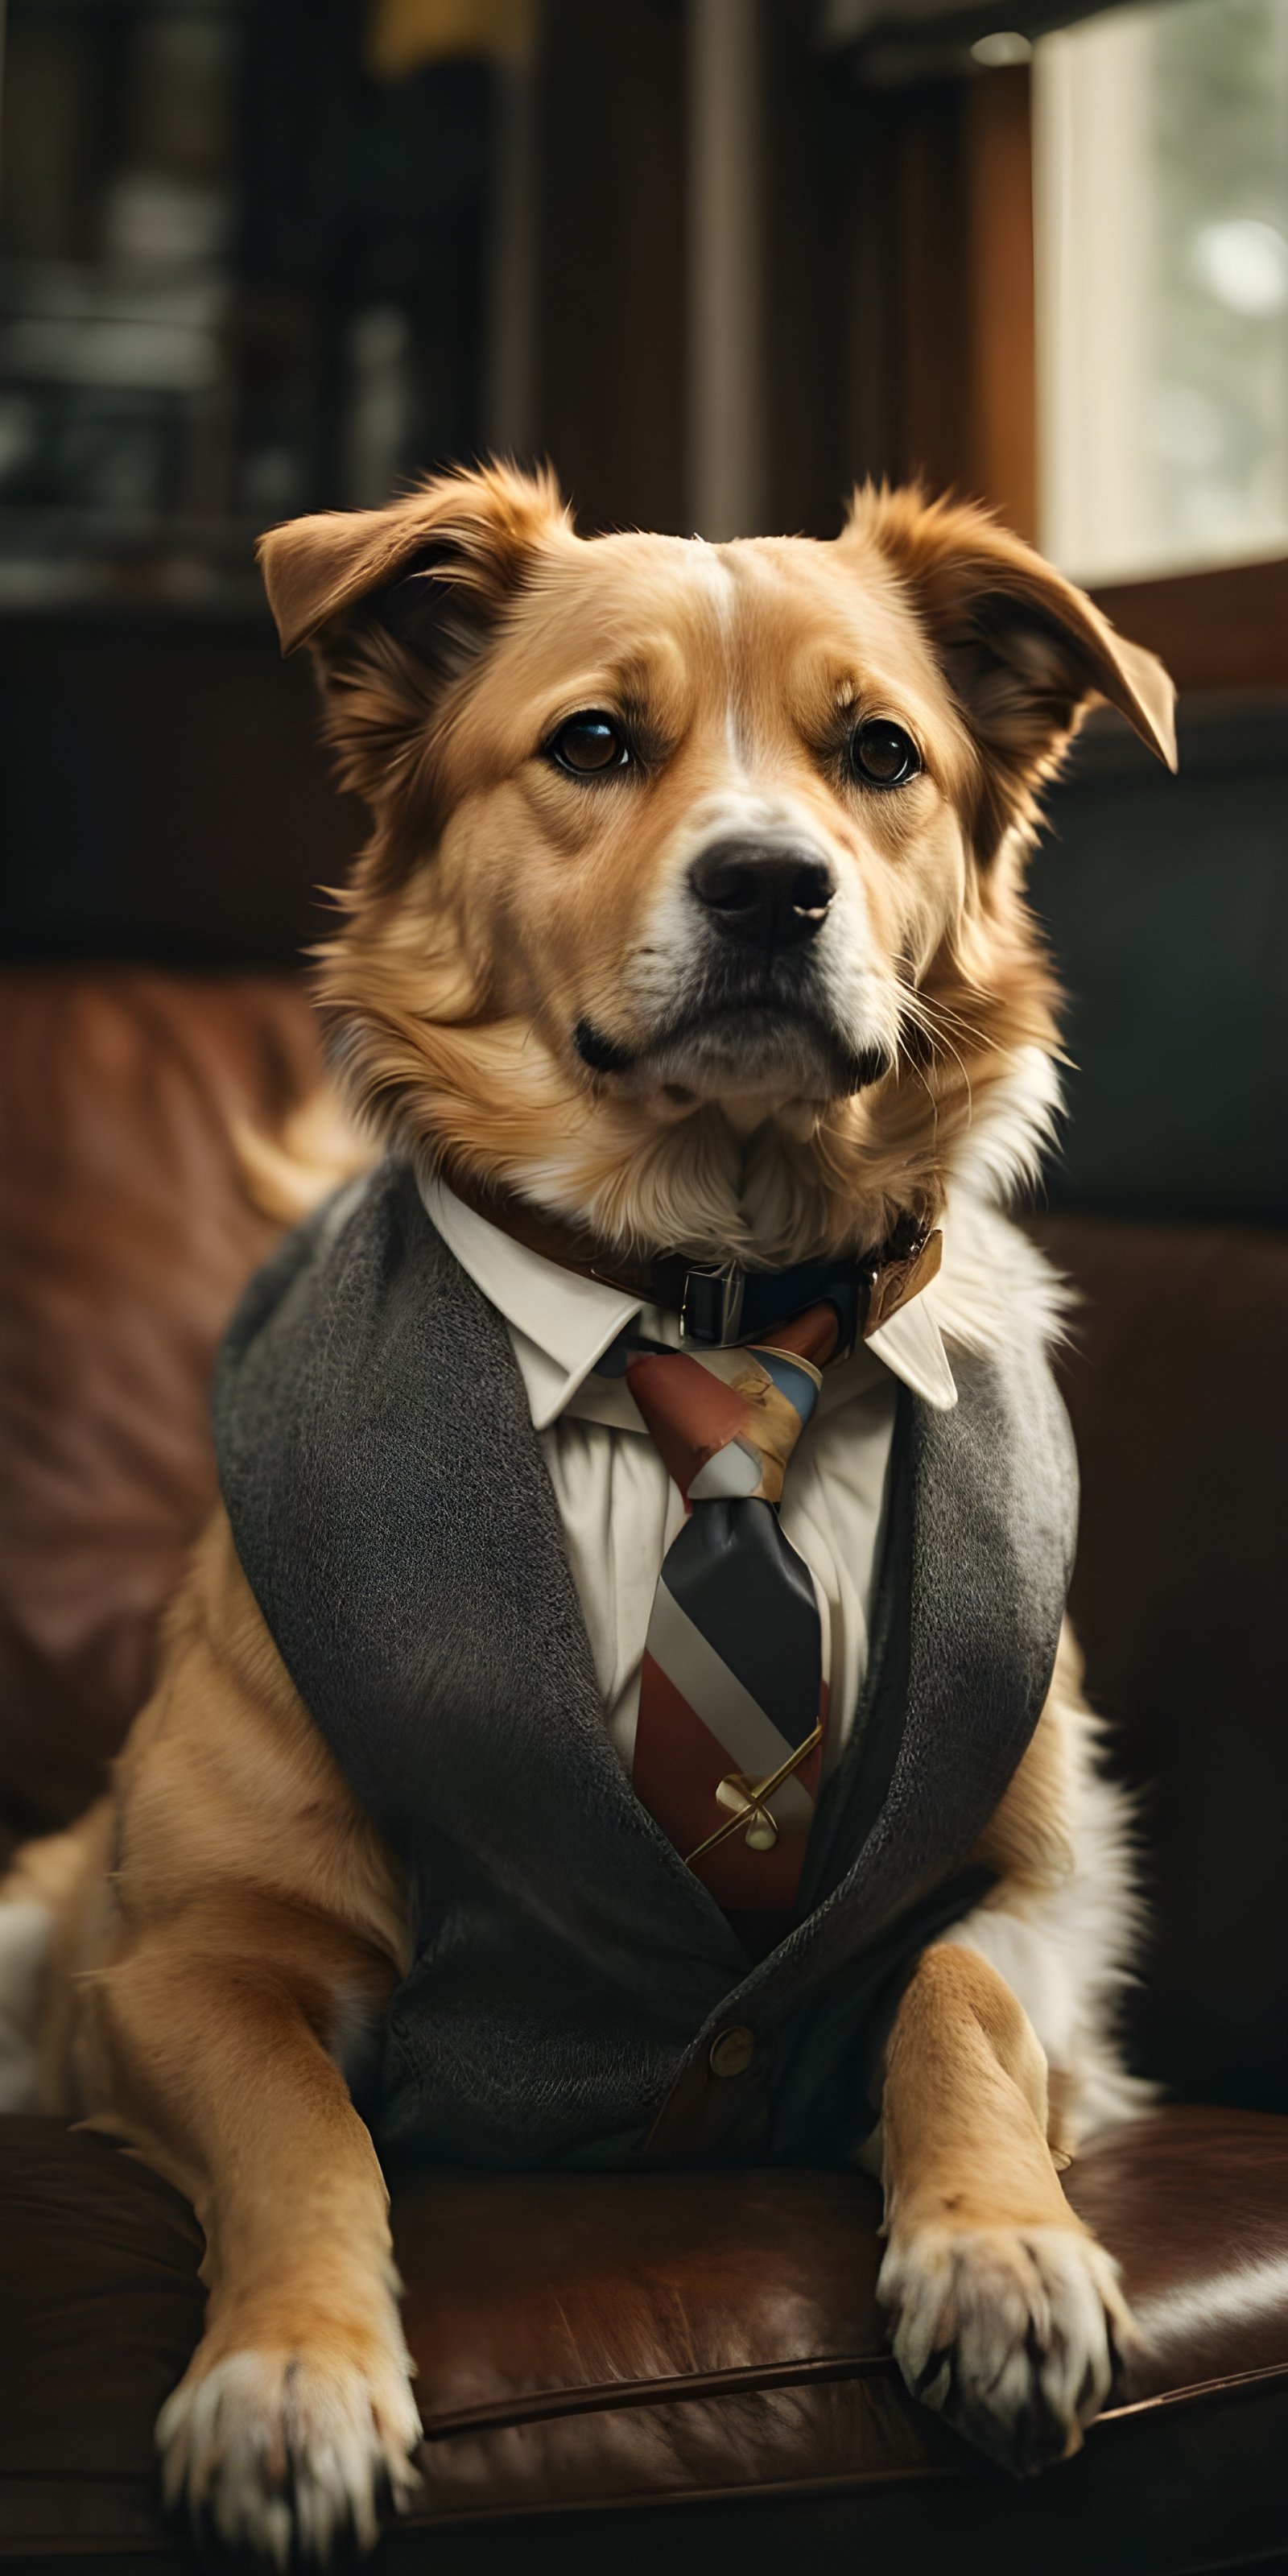 Dog in Jacket Phone Wallpapers